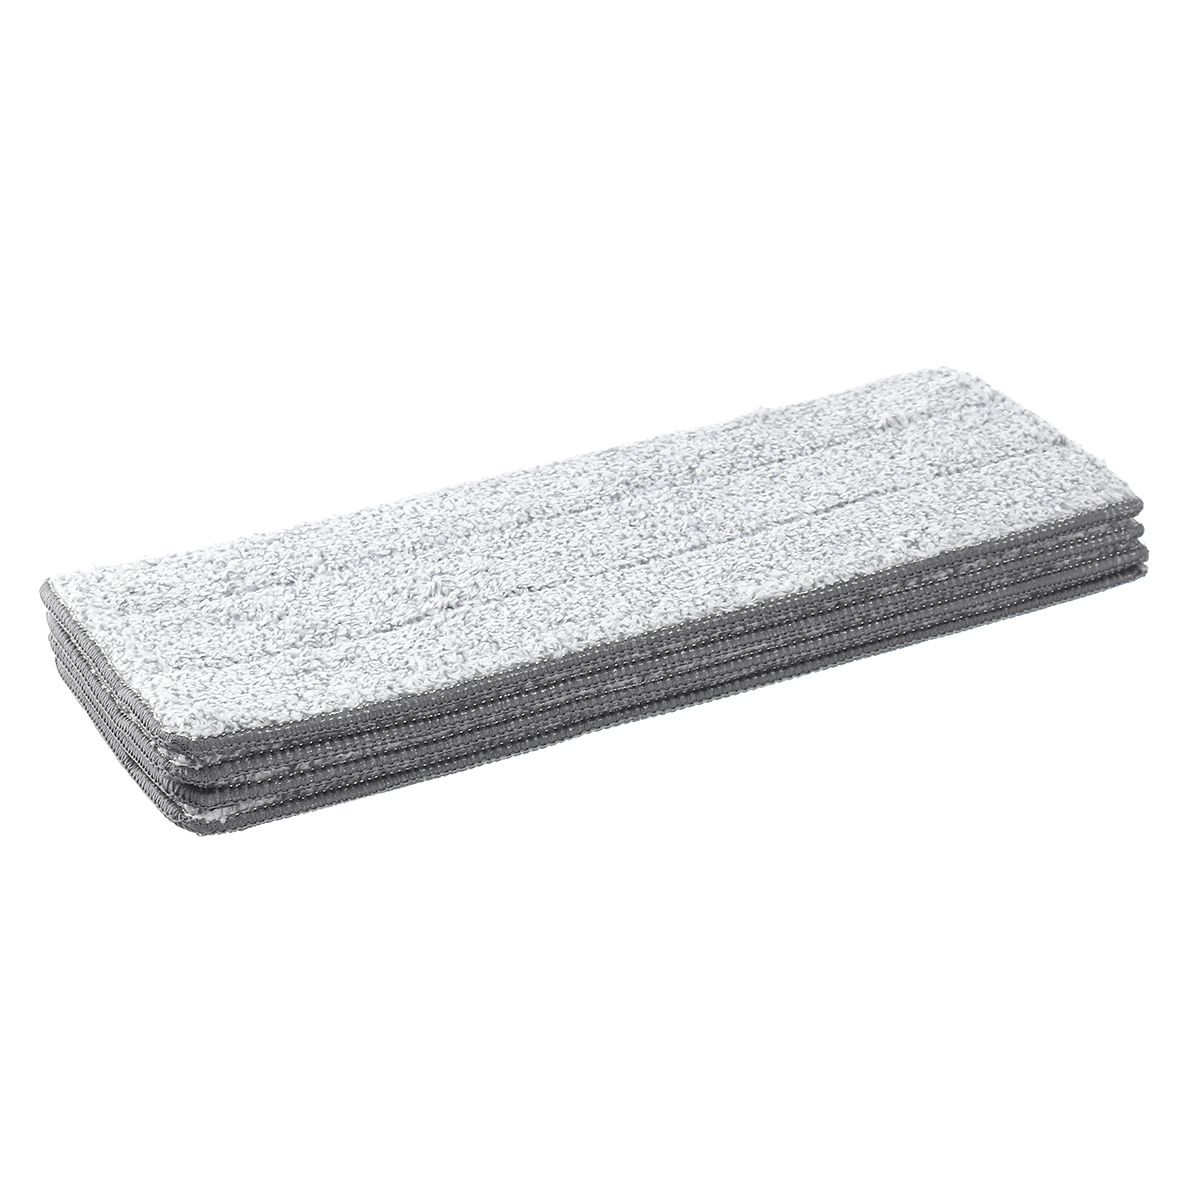 Flat-Mop-Pad-Cleaning-Squeeze-Bucket-Free-Hand-Spin-Washing-Ultrafine-Microfiber-1582849